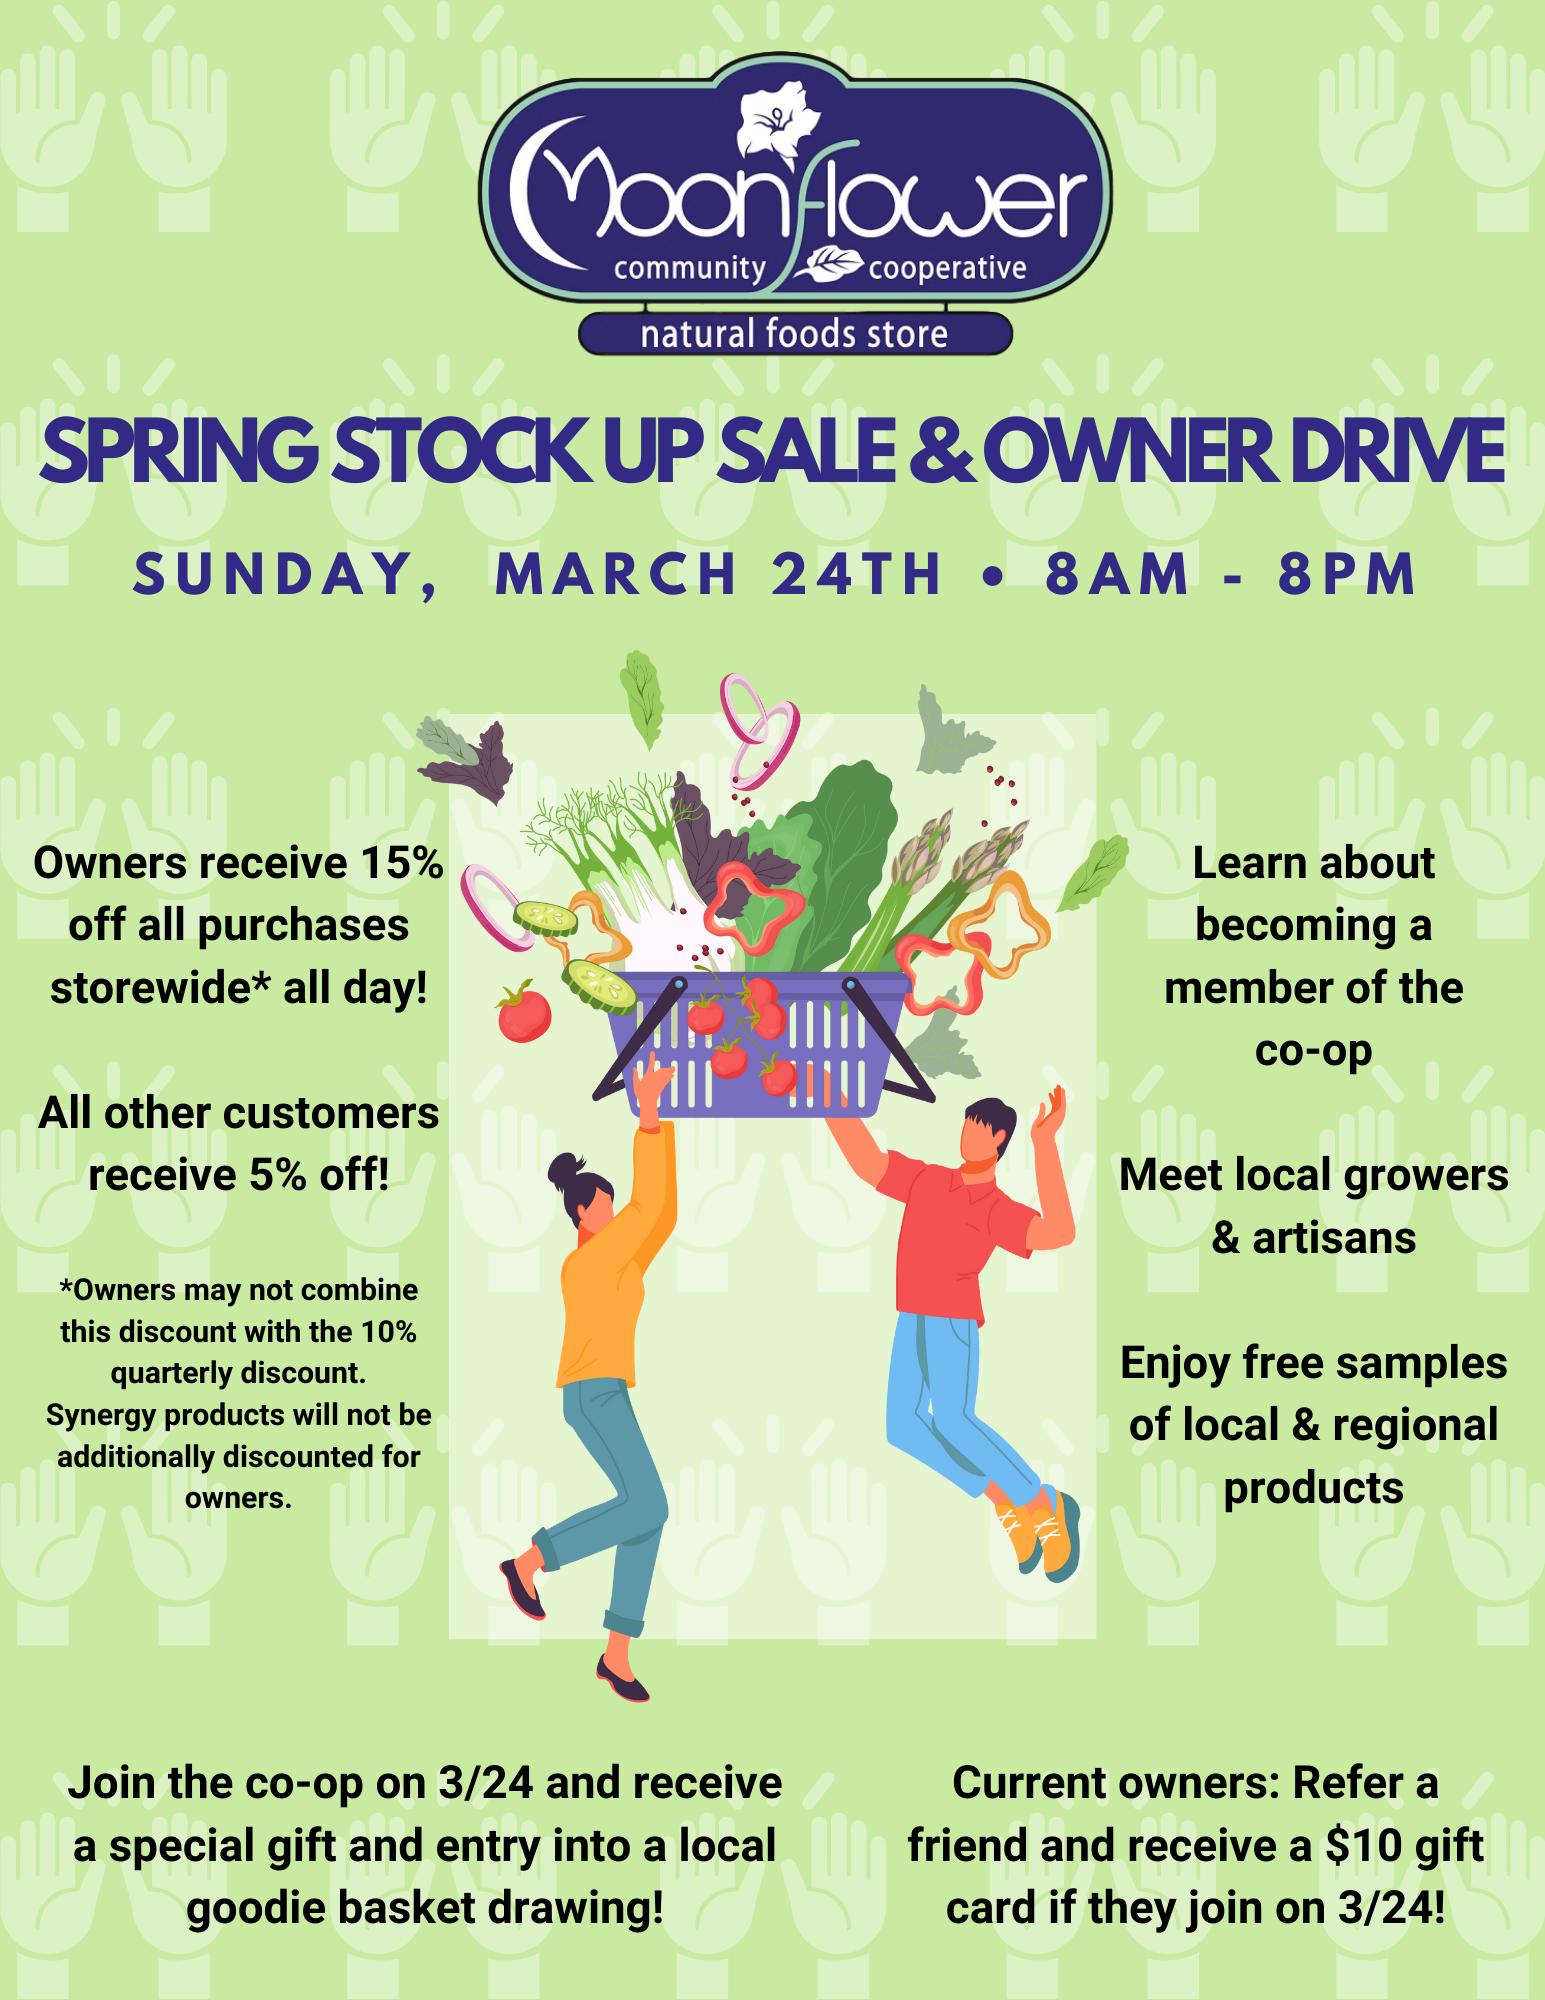 Spring Stock Up Sale & Owner Drive